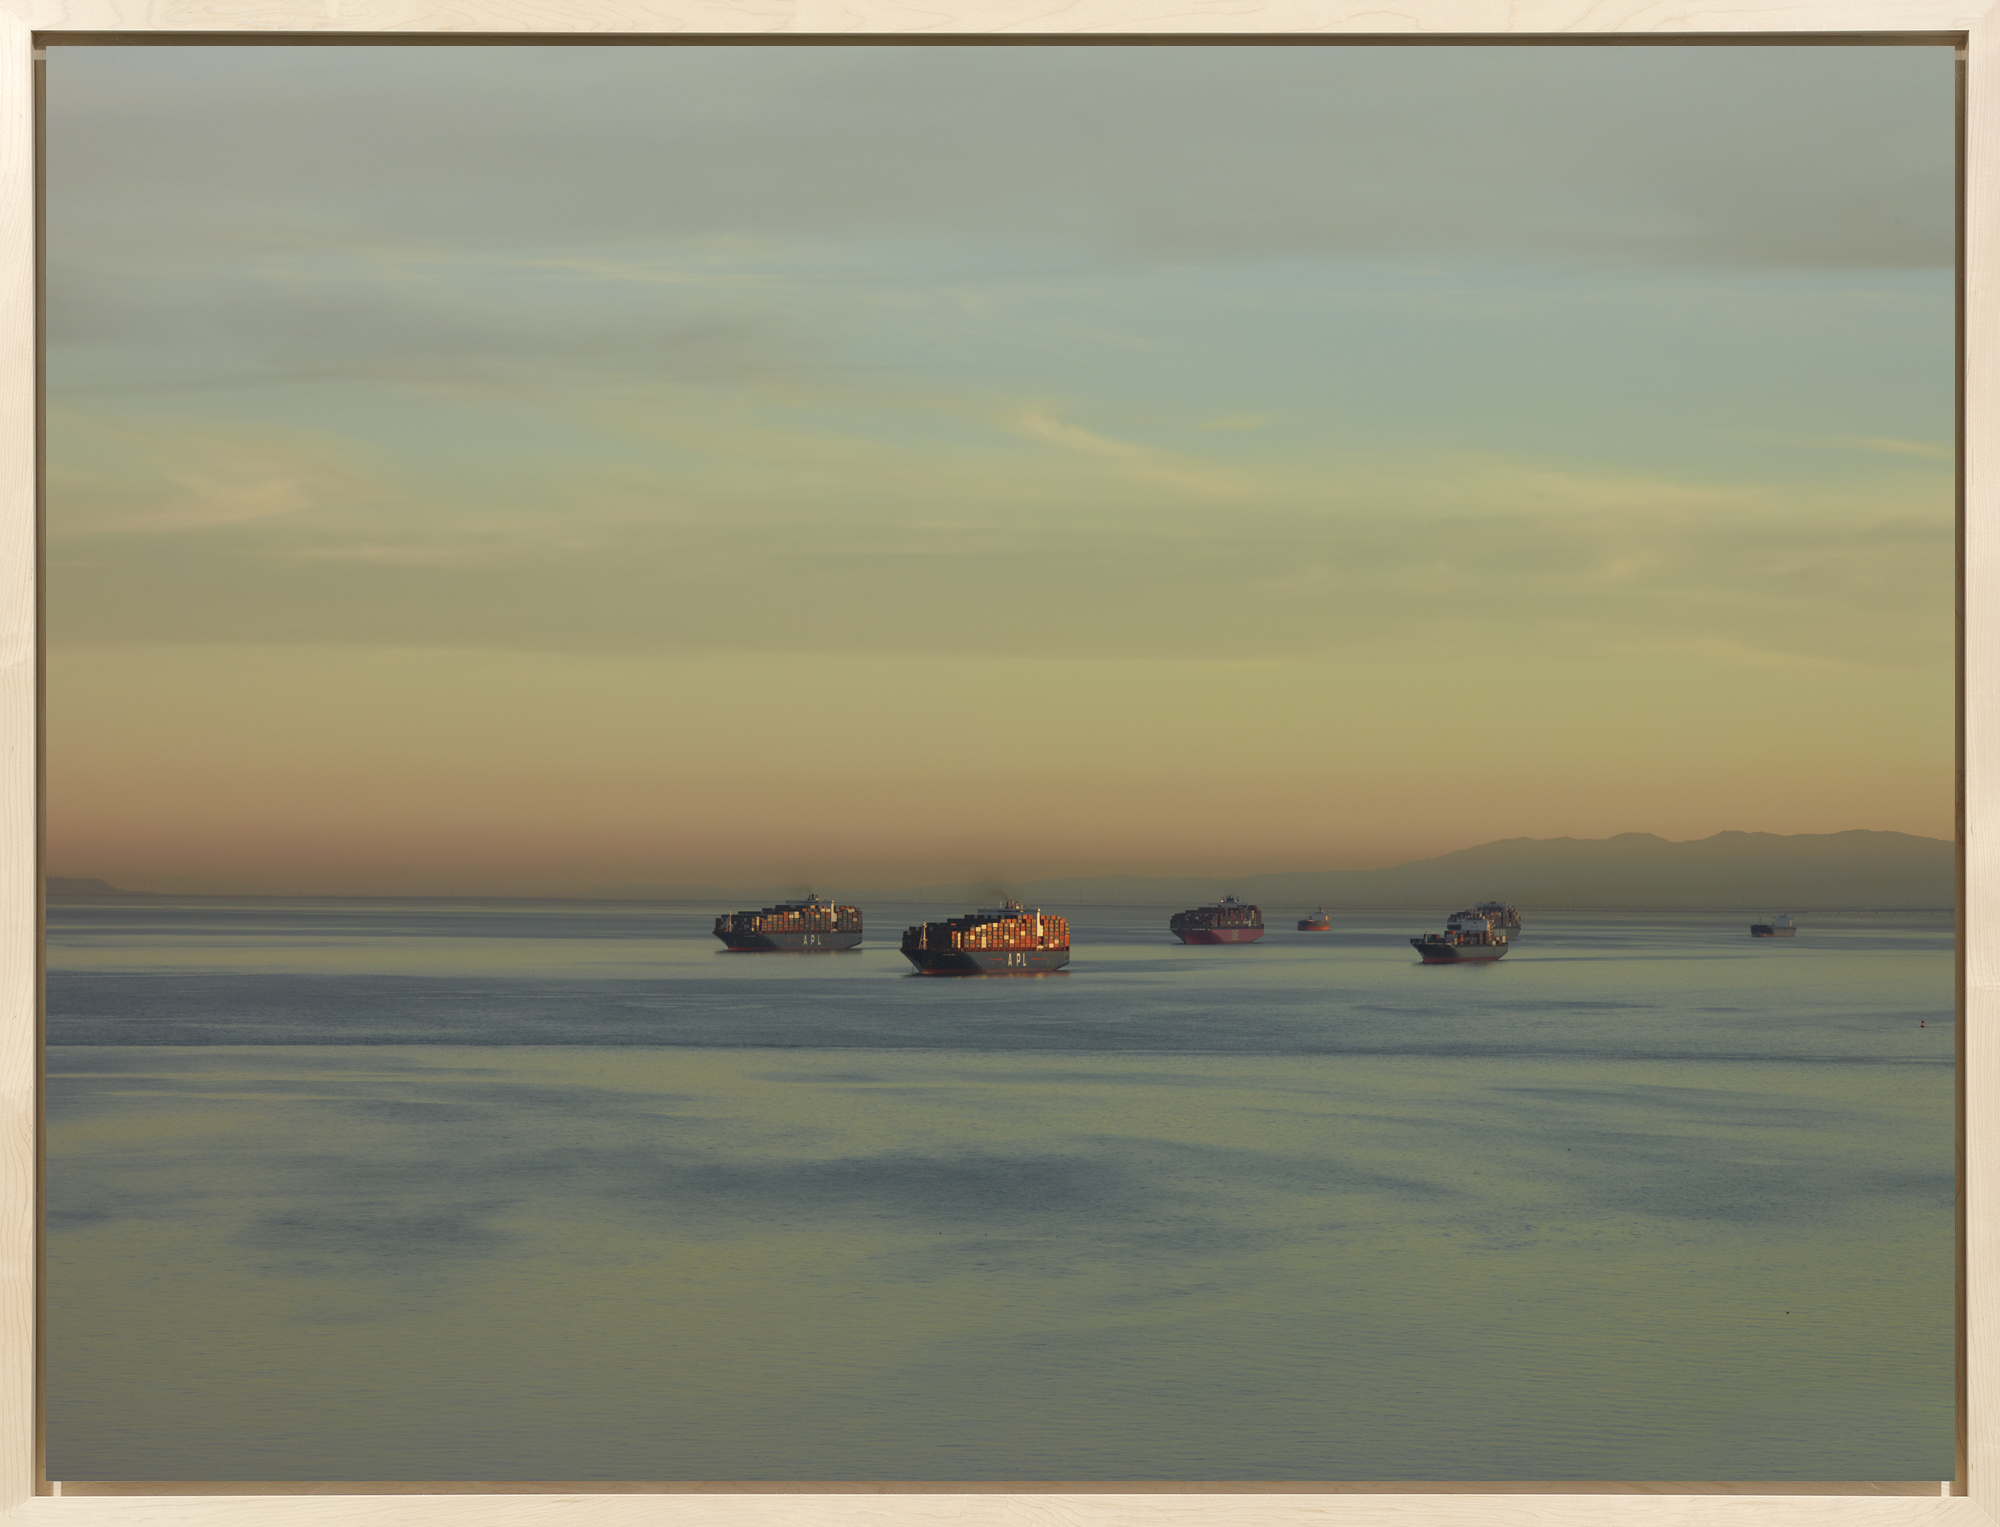 Framed color photograph of several cargo ships loaded with shipping containers on a blue expanse of water